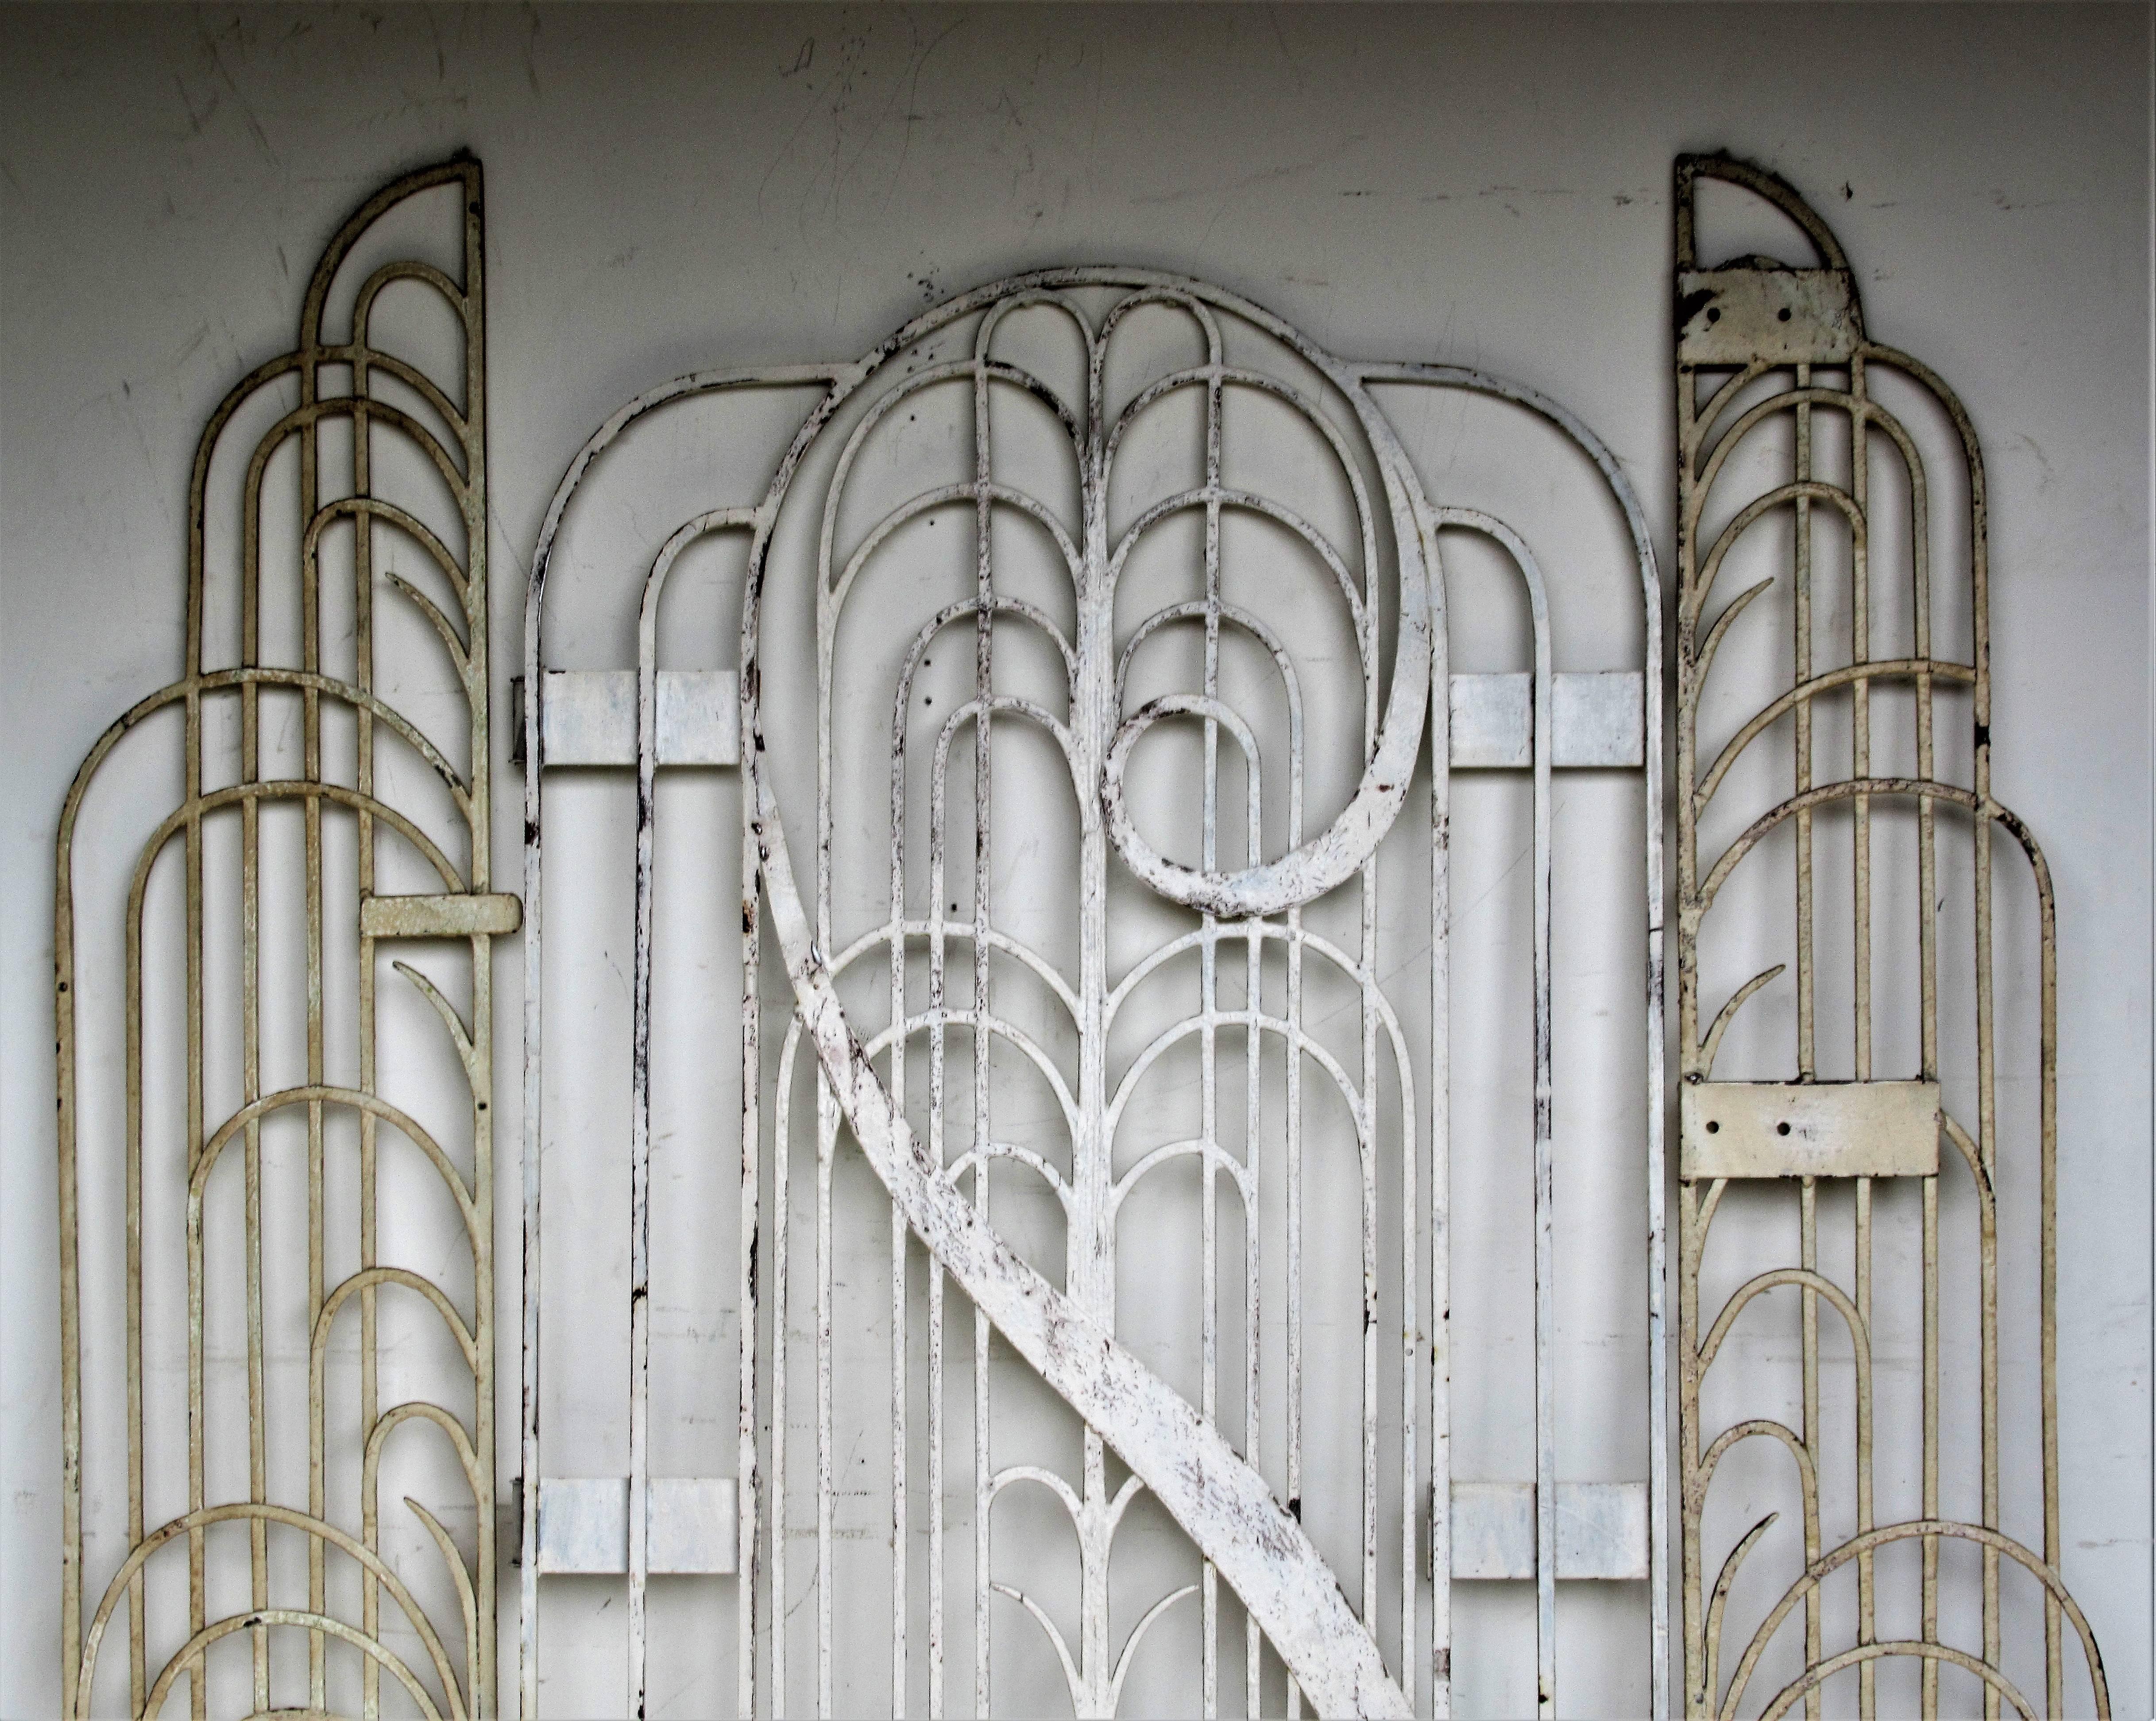 Hand-Crafted American Art Deco Architectural Hand Wrought Iron Gates